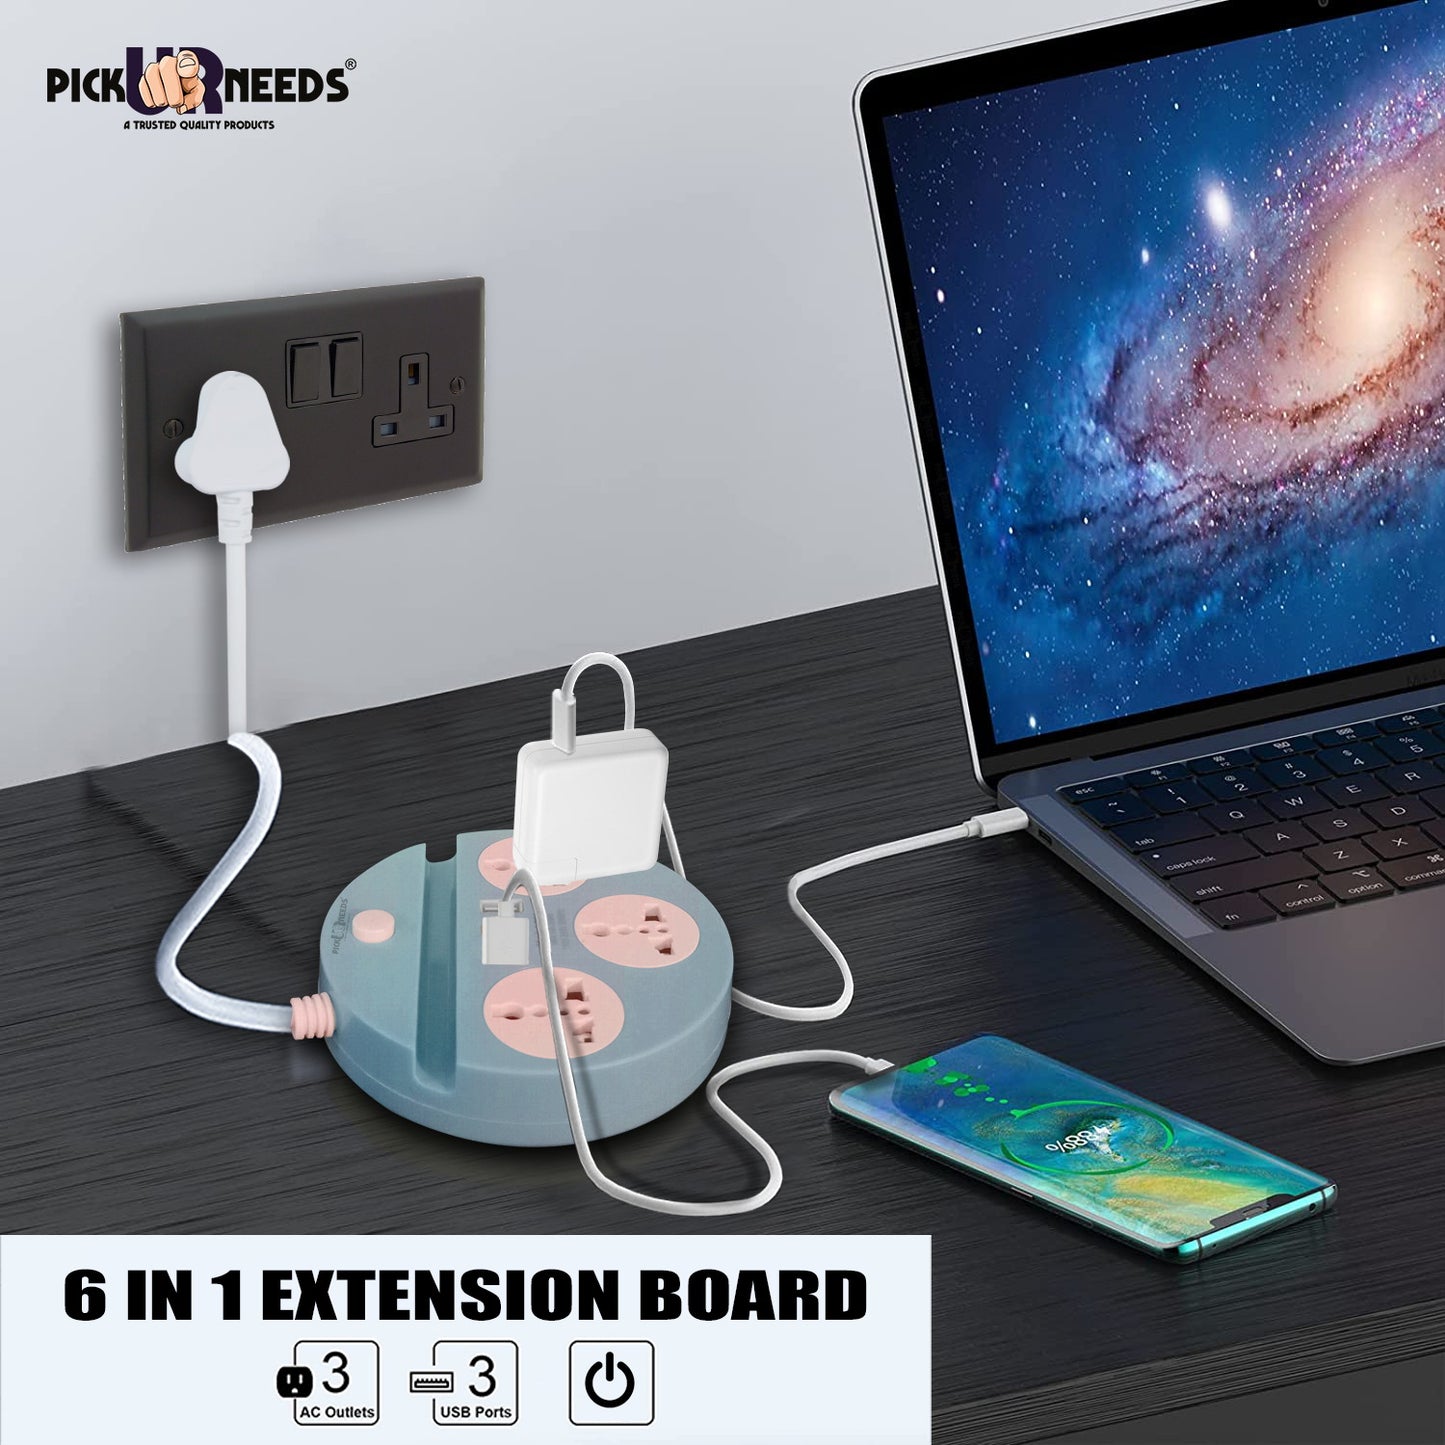 Pick Ur Needs Extension Cord Board with 3 USB Charging Ports and 3 Socket -10 Amp Heavy Duty for Multiple Devices Smartphone Tablet Laptop